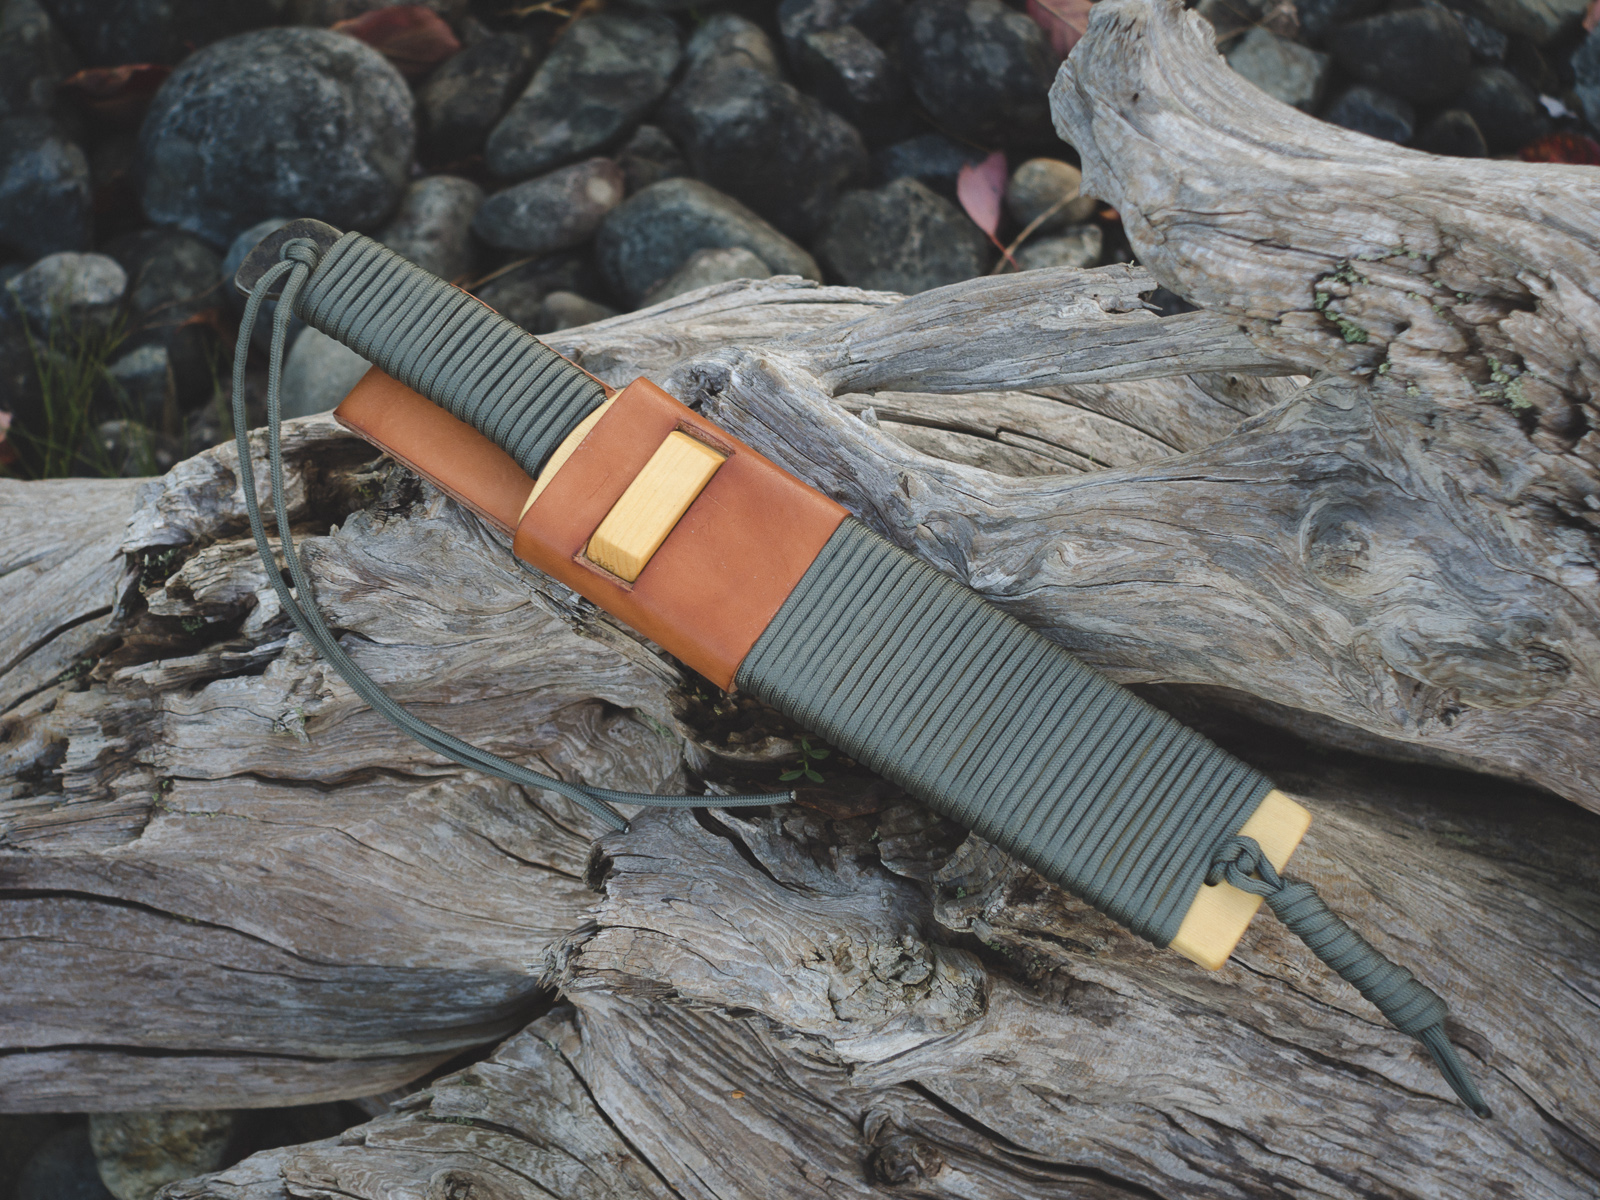 Island Blacksmith: Hand crafted 309 camp bowie made from reclaimed steel using traditional techniques